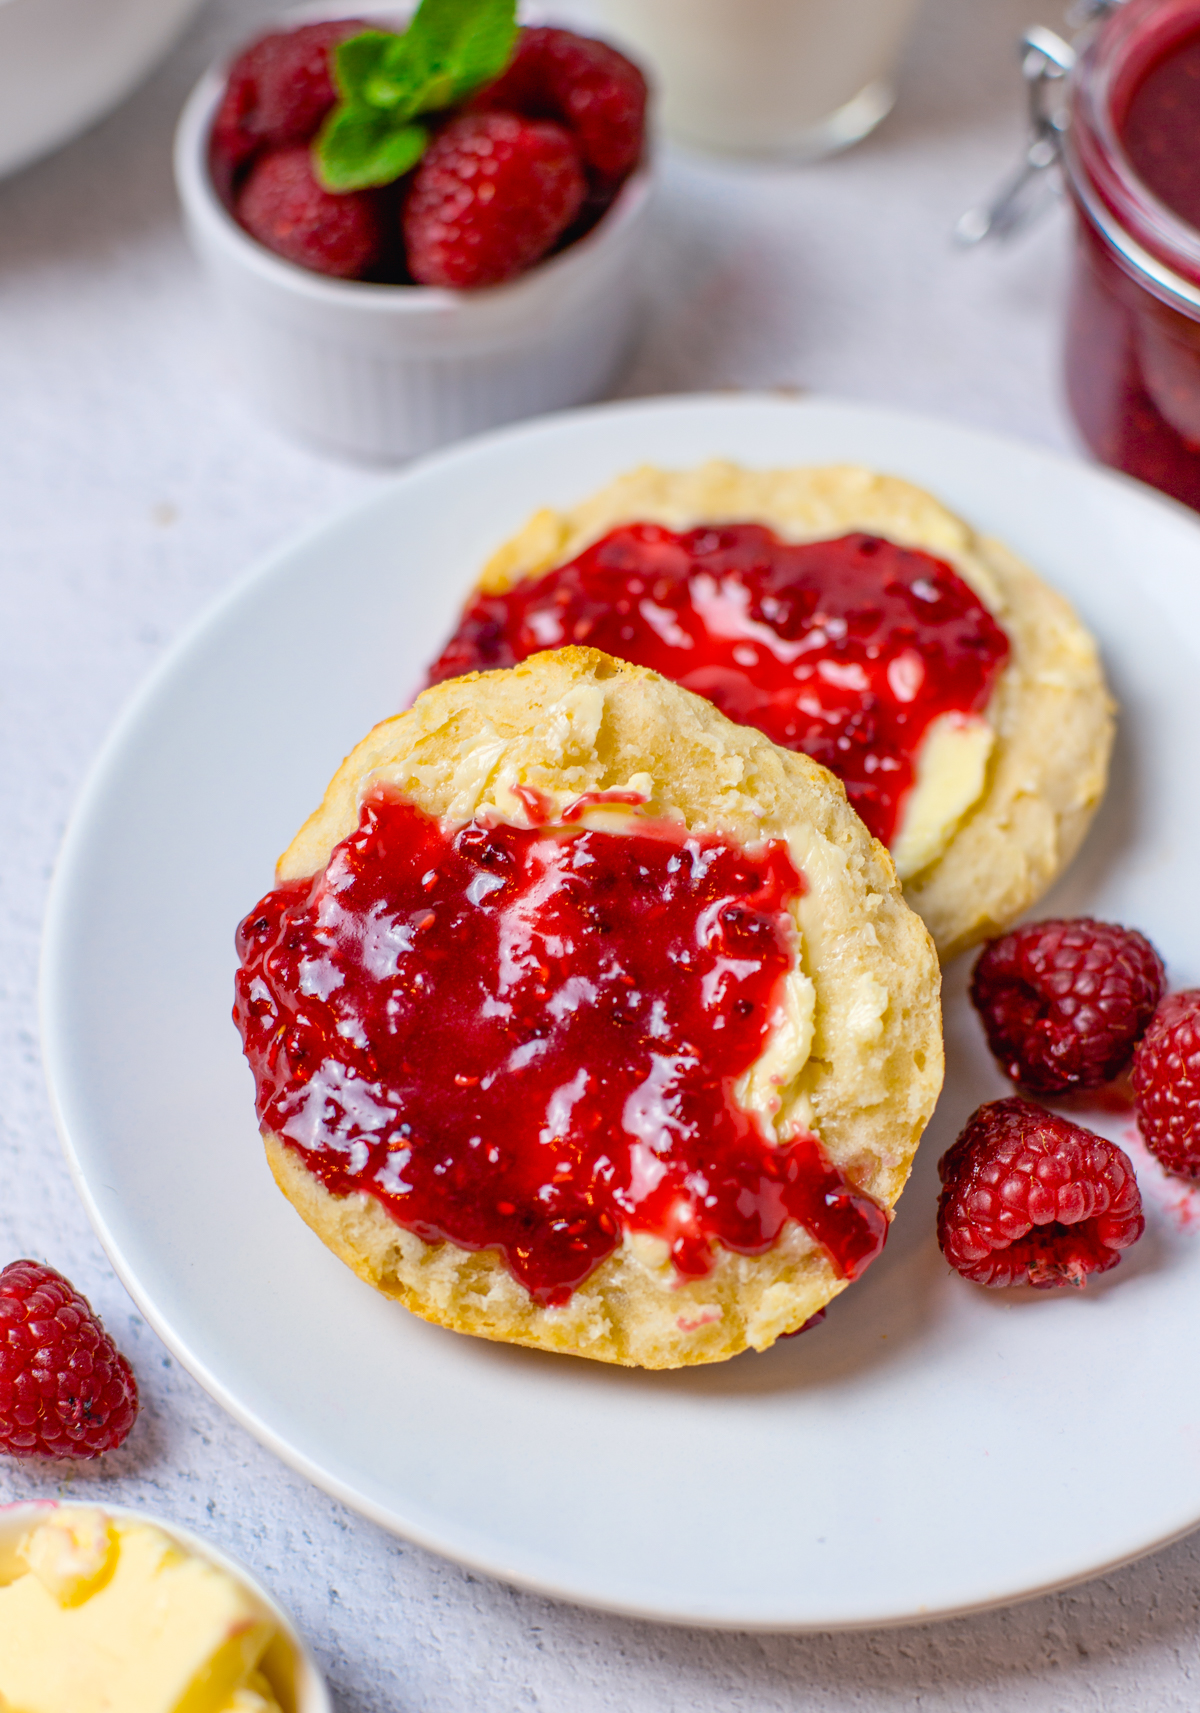 Biscuits spread with Raspberry Curd Recipe